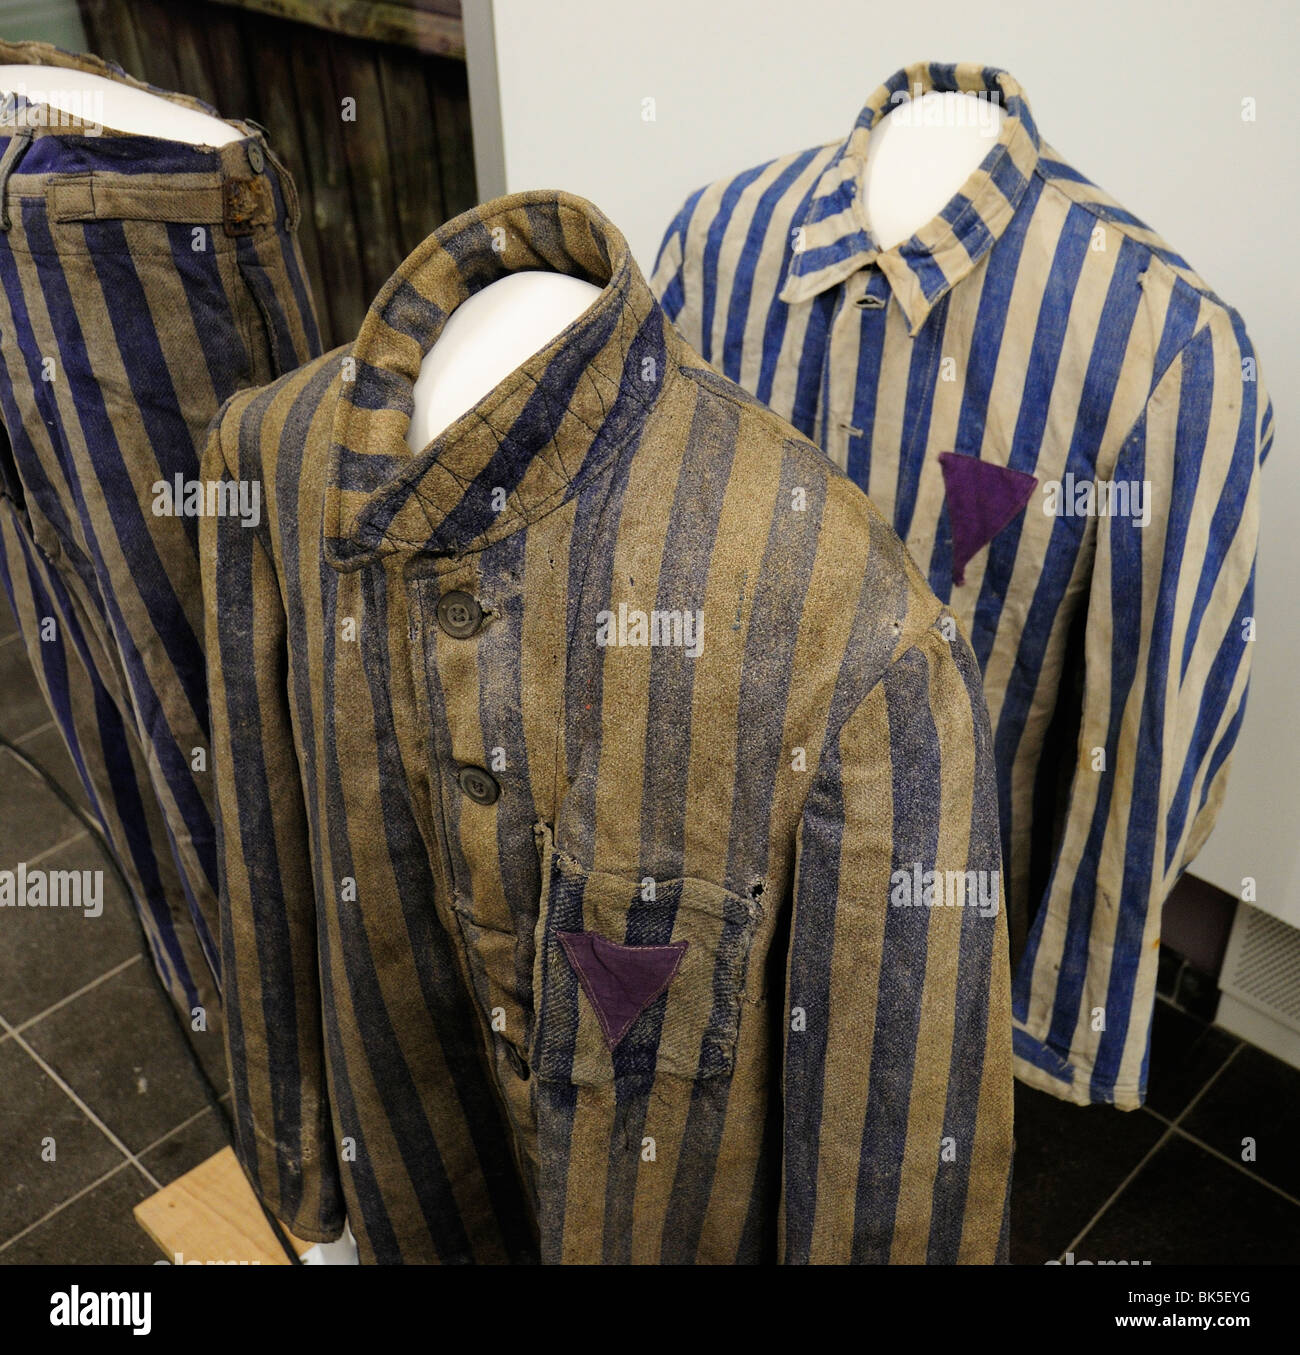 Striped uniforms of concentration camp prisoners on display in museum of Wewelsburg SS castle, Germany Stock Photo